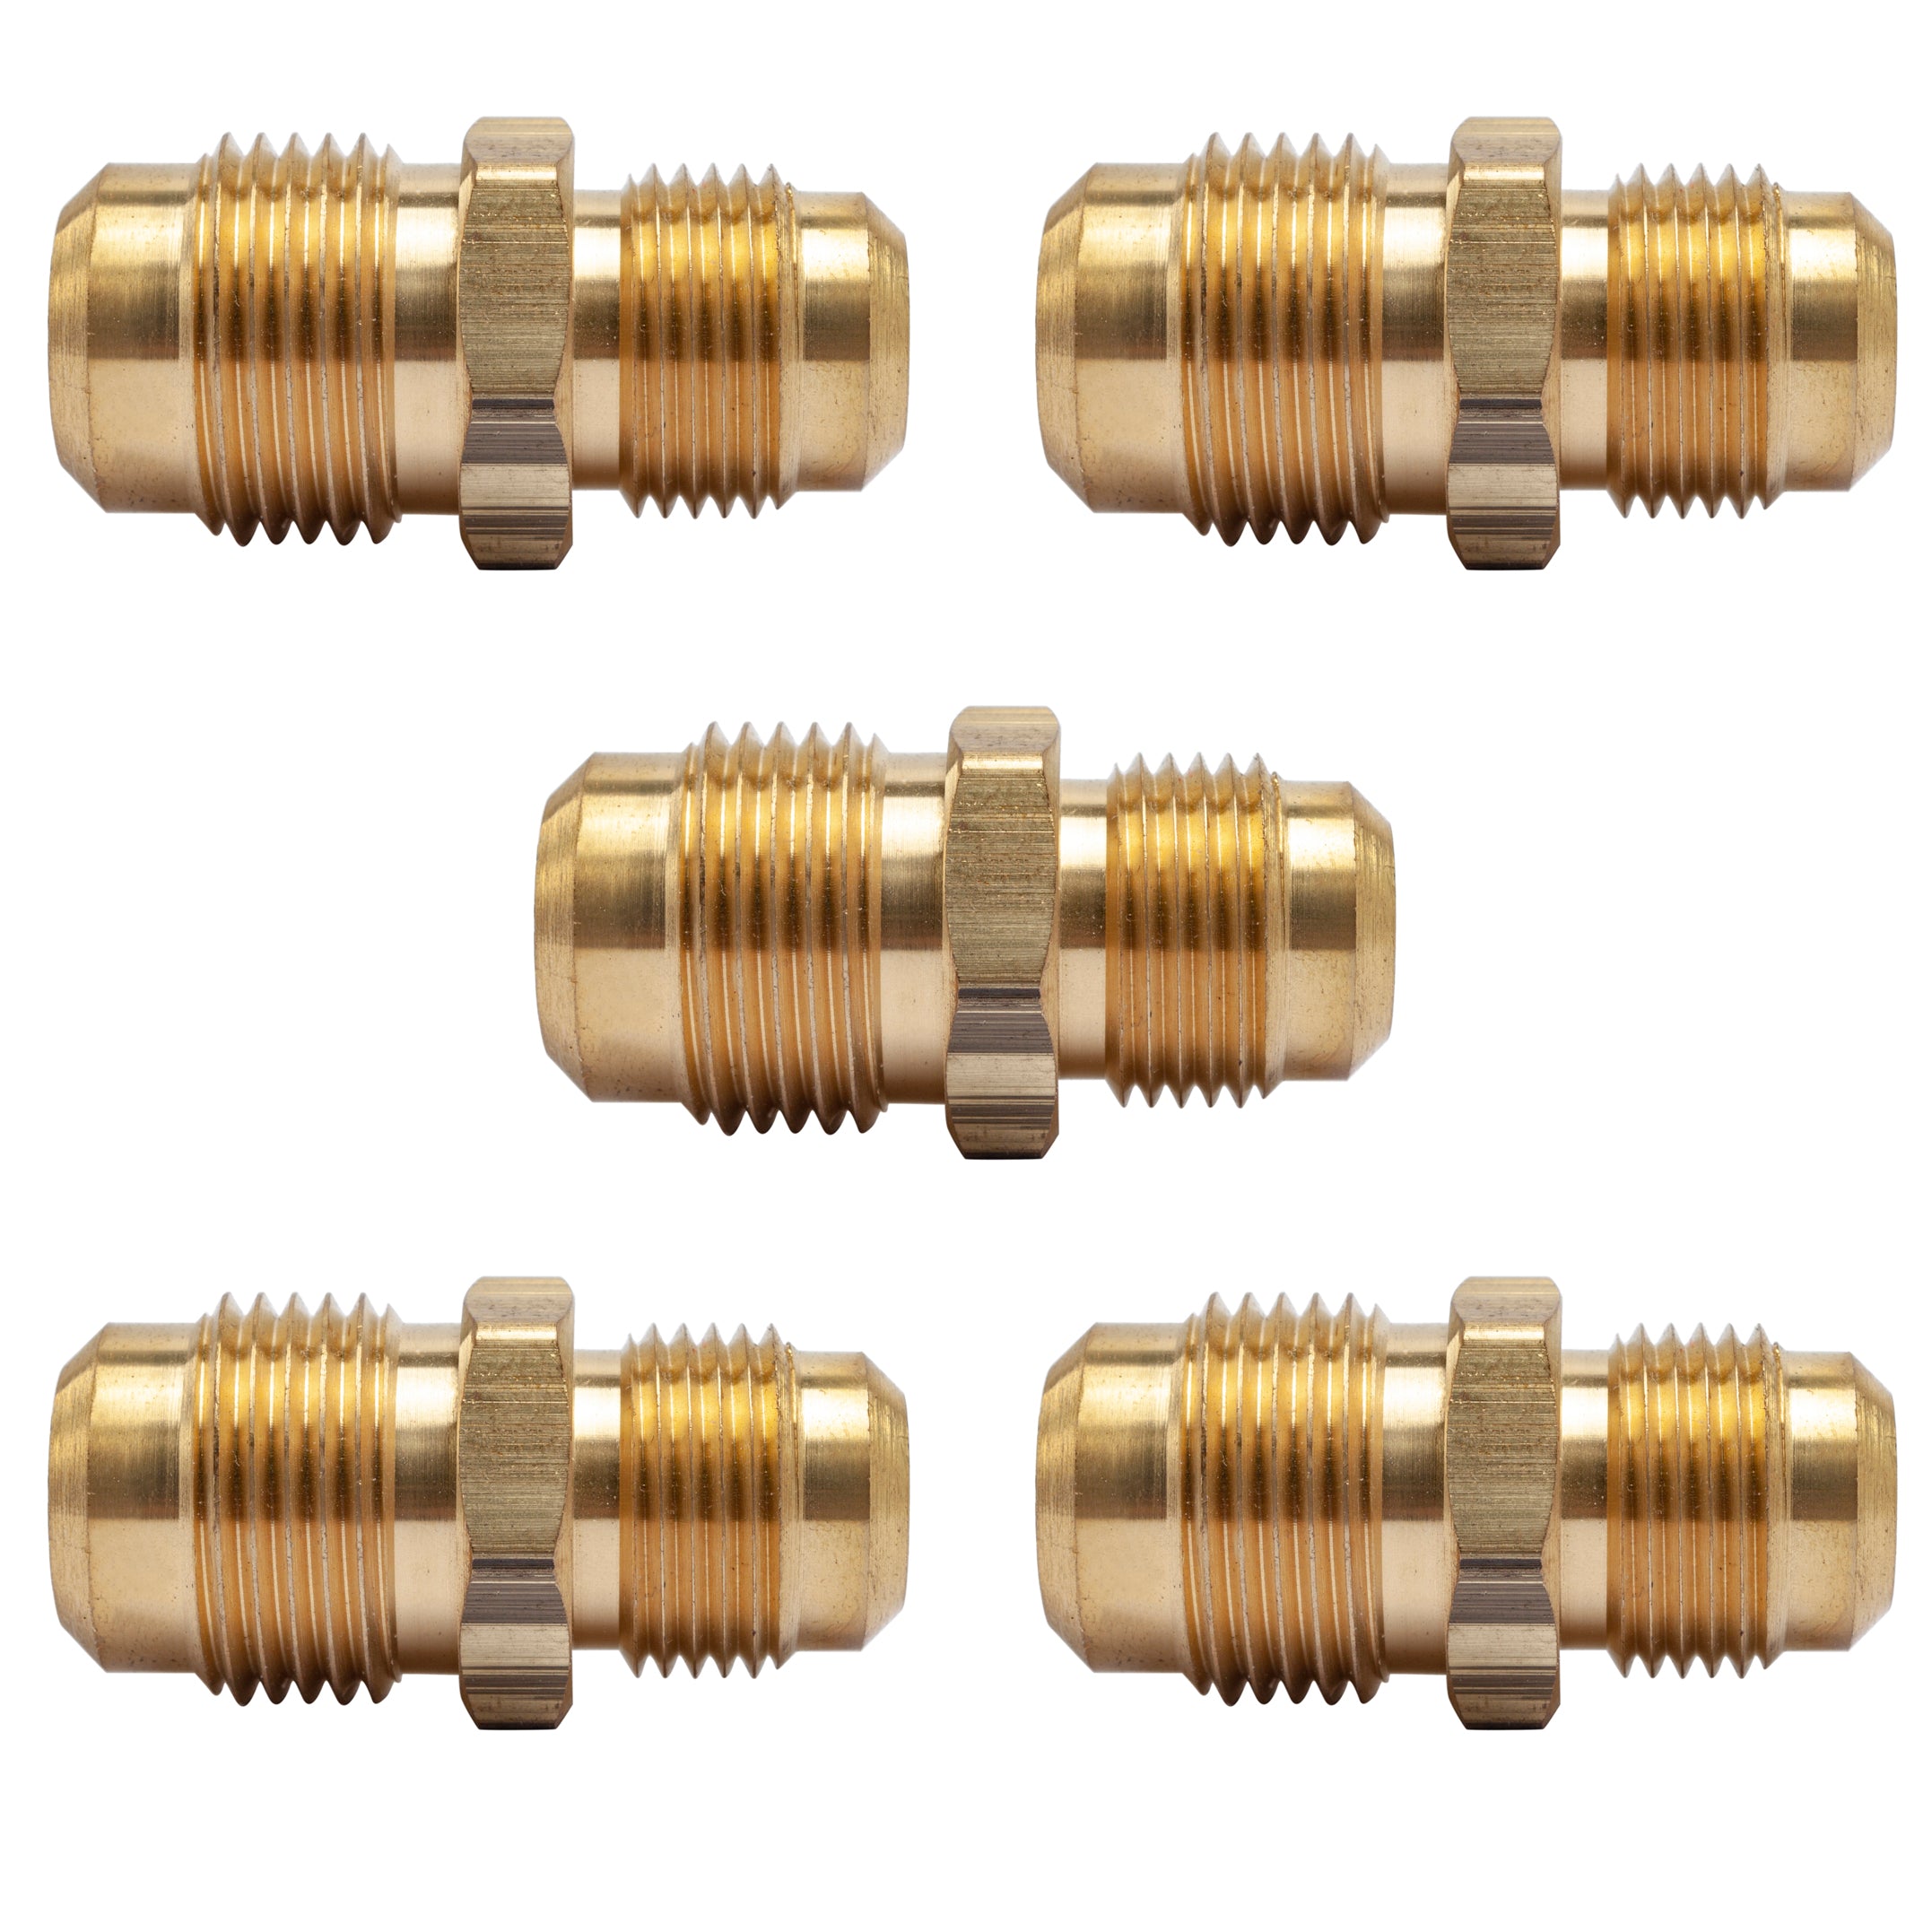 LTWFITTING Brass 5/8 Inch OD x 1/2 Inch OD Flare Reducing Union,Brass Flare Tube Fitting(Pack of 5)